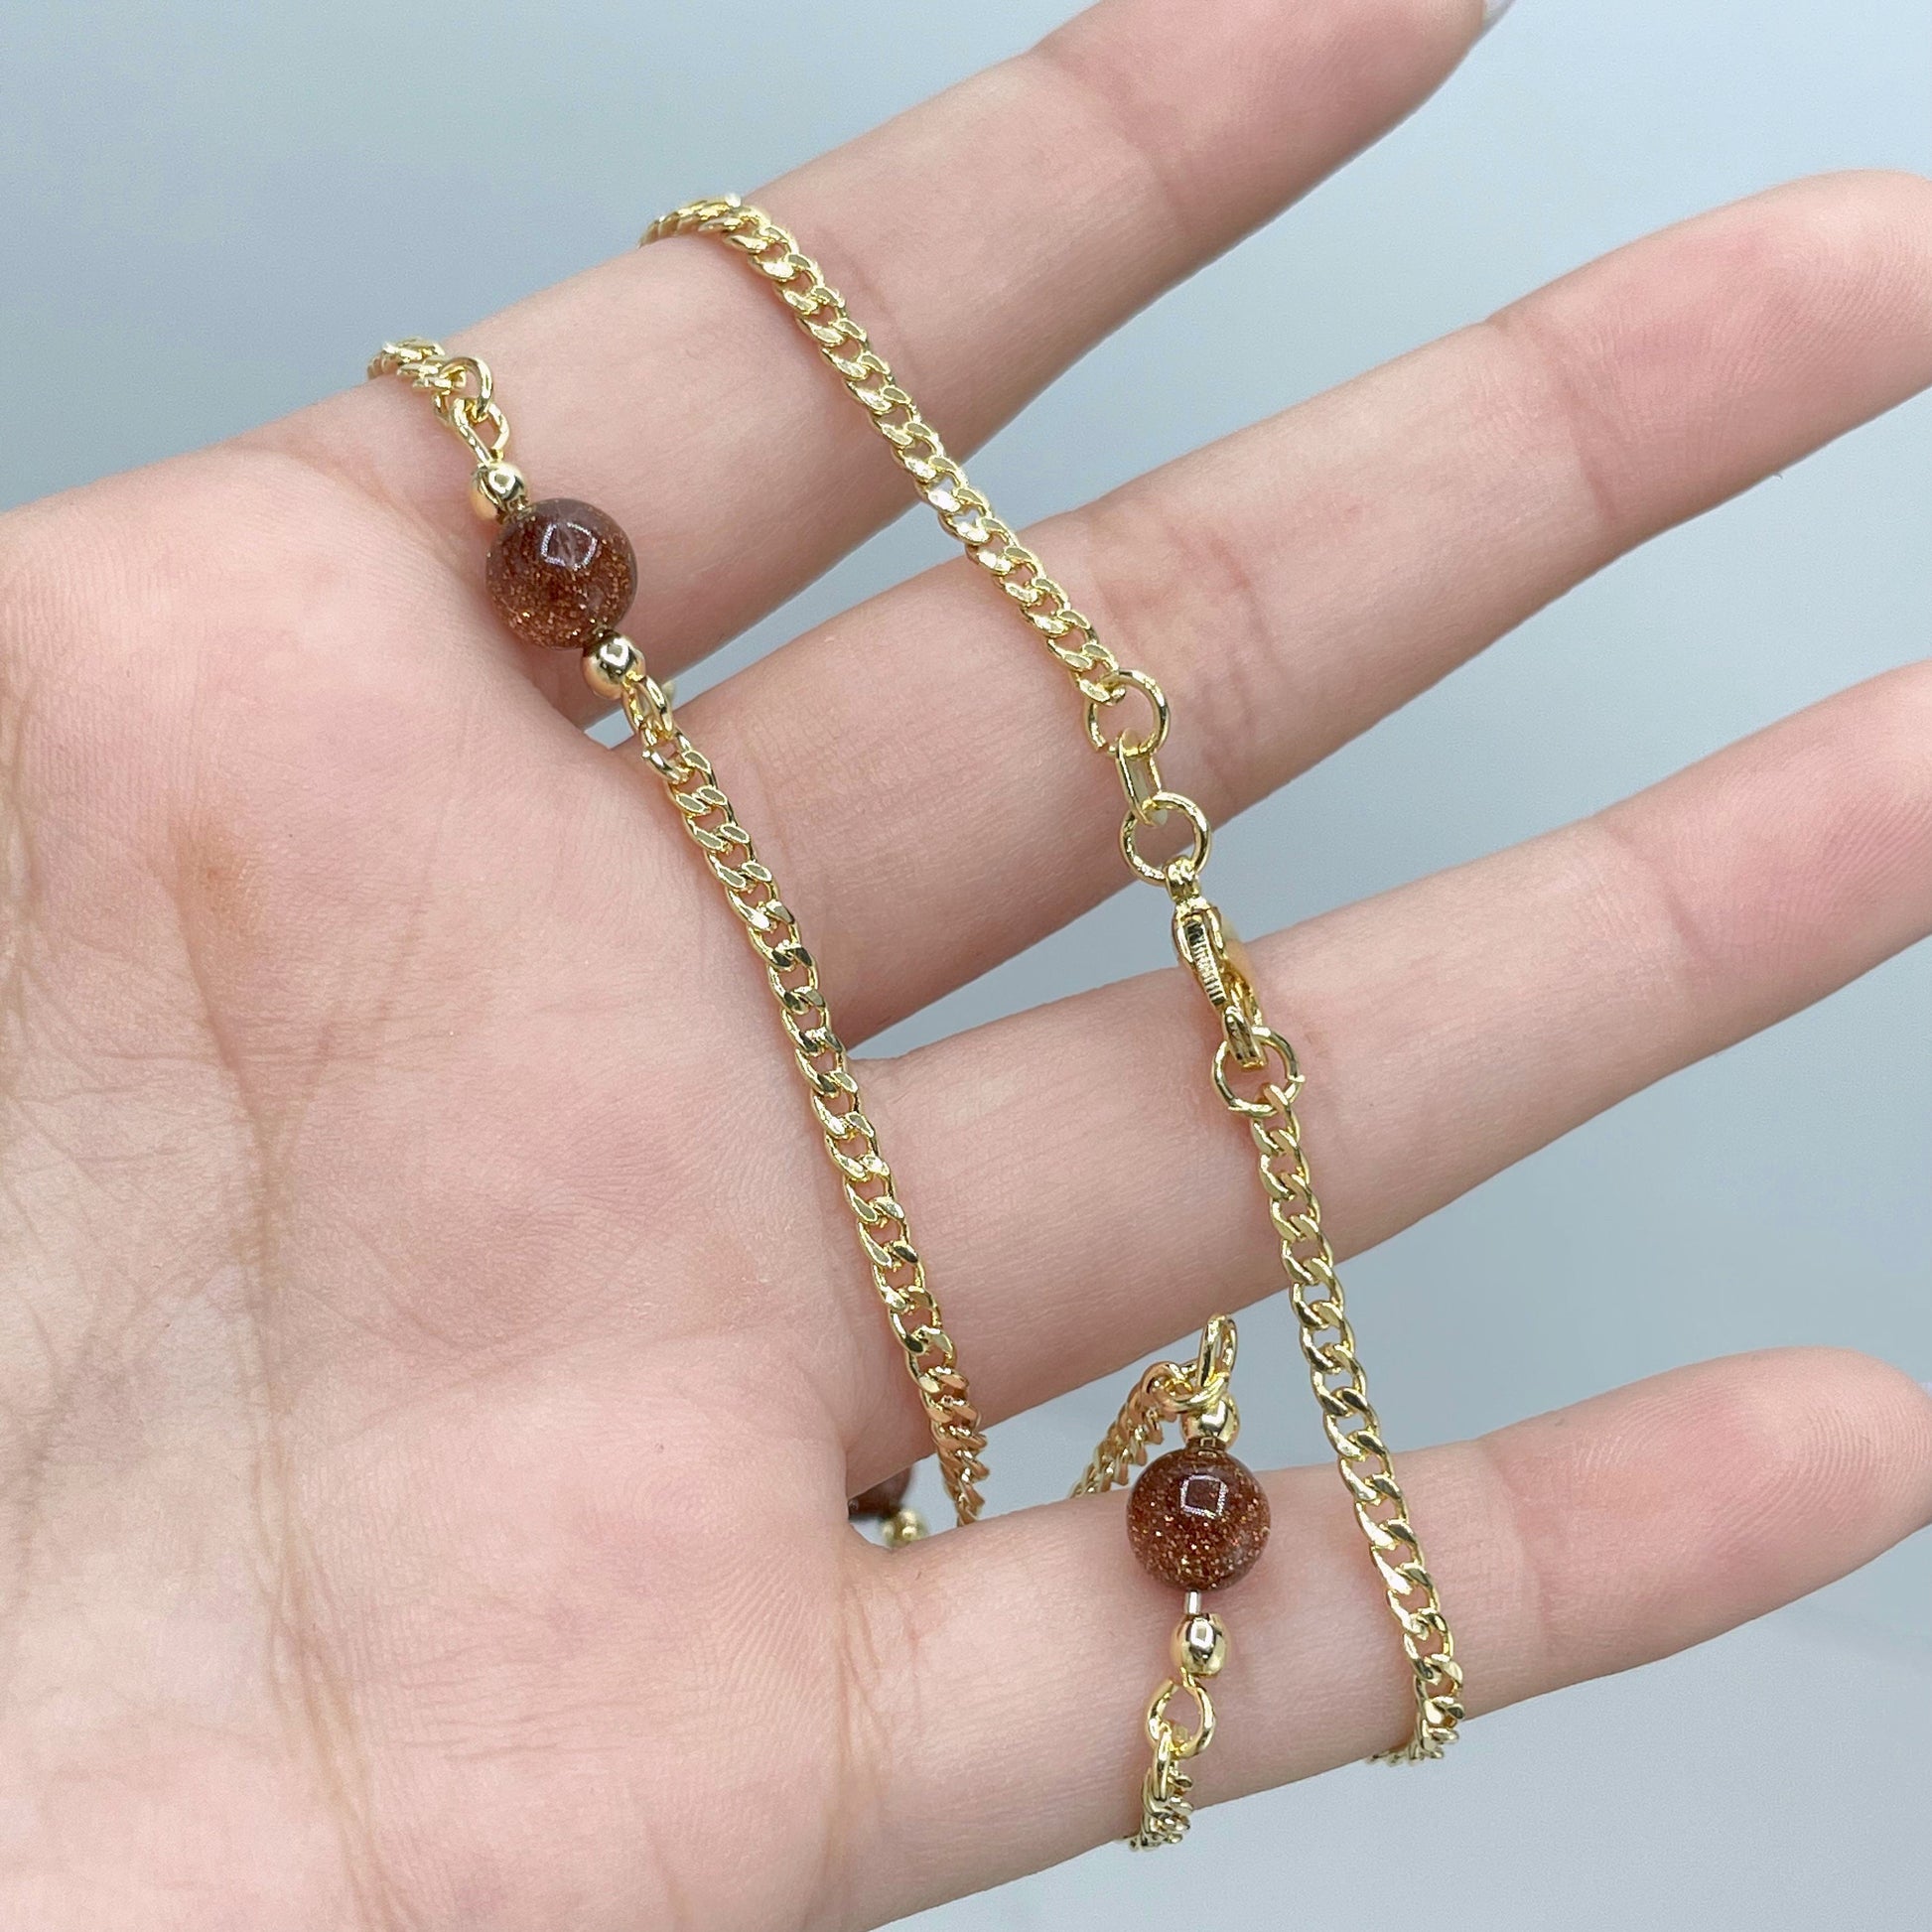 18k Gold Filled Brown Aventurine Bead Necklace Curb Link Chain Wholesale Jewelry Making Supplies